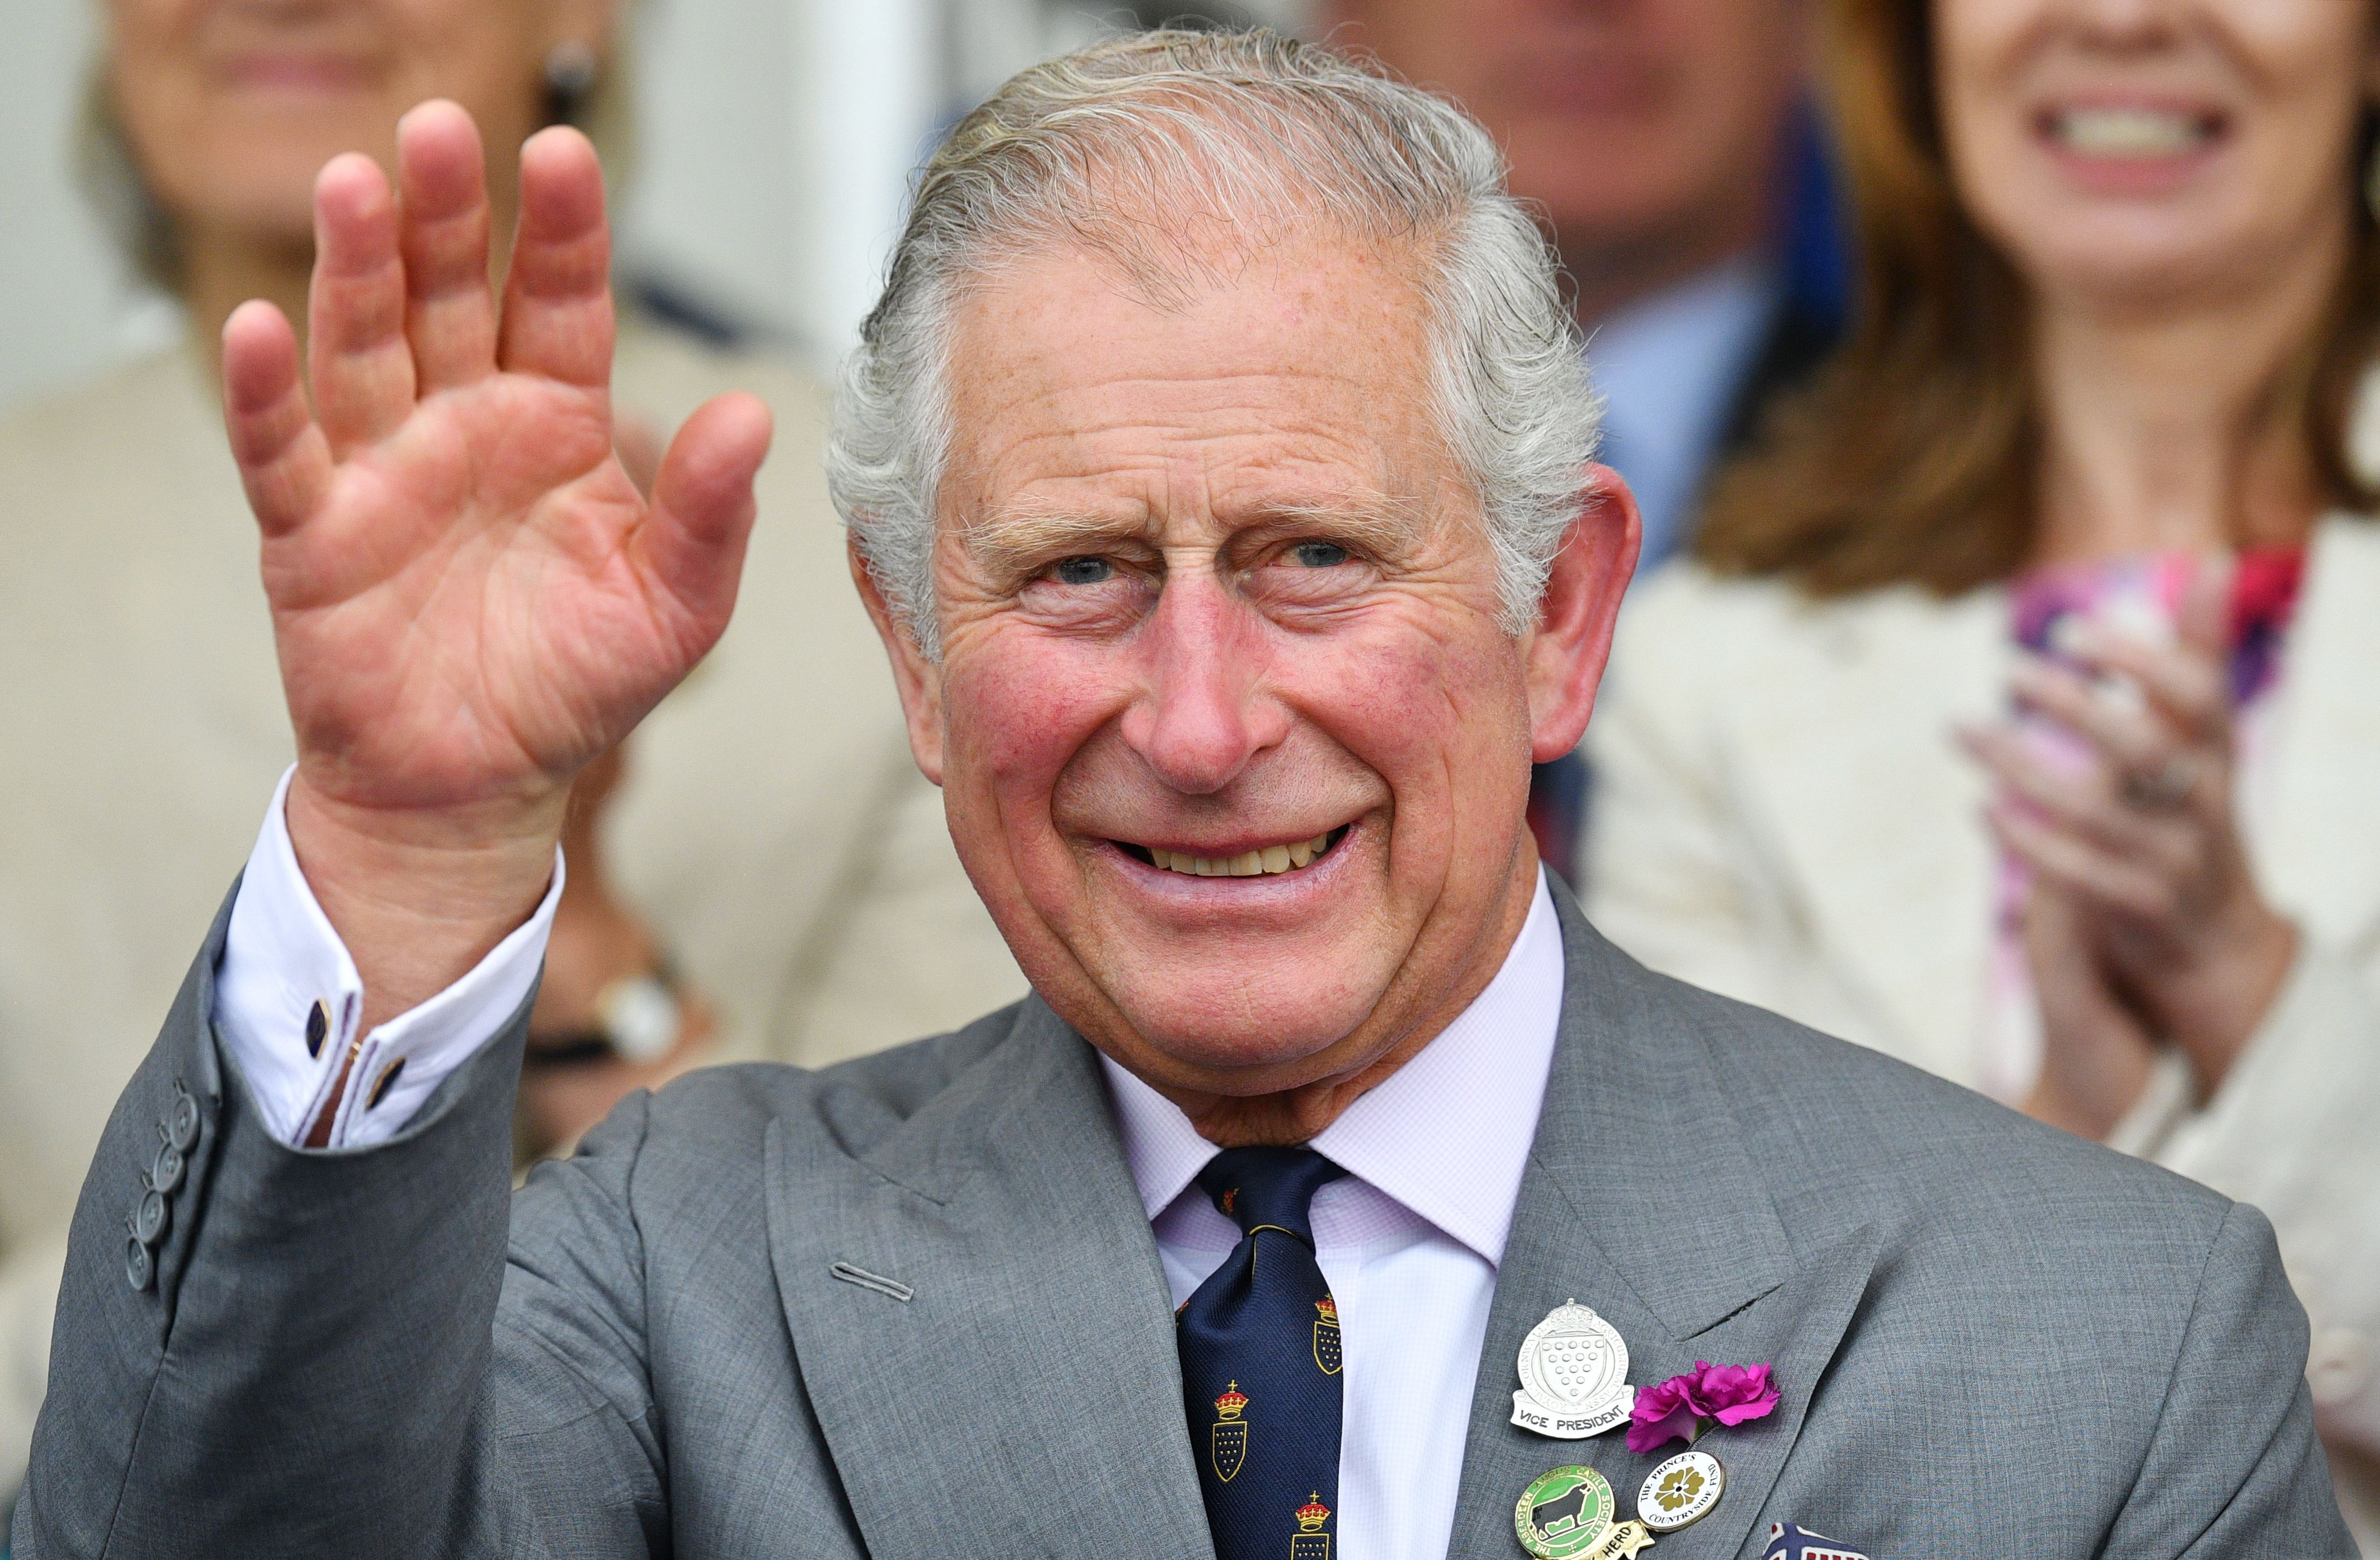 King Charles waves as he attends the Royal Cornwall Show on June 07, 2018, in Wadebridge, United Kingdom. | Source: Getty Images